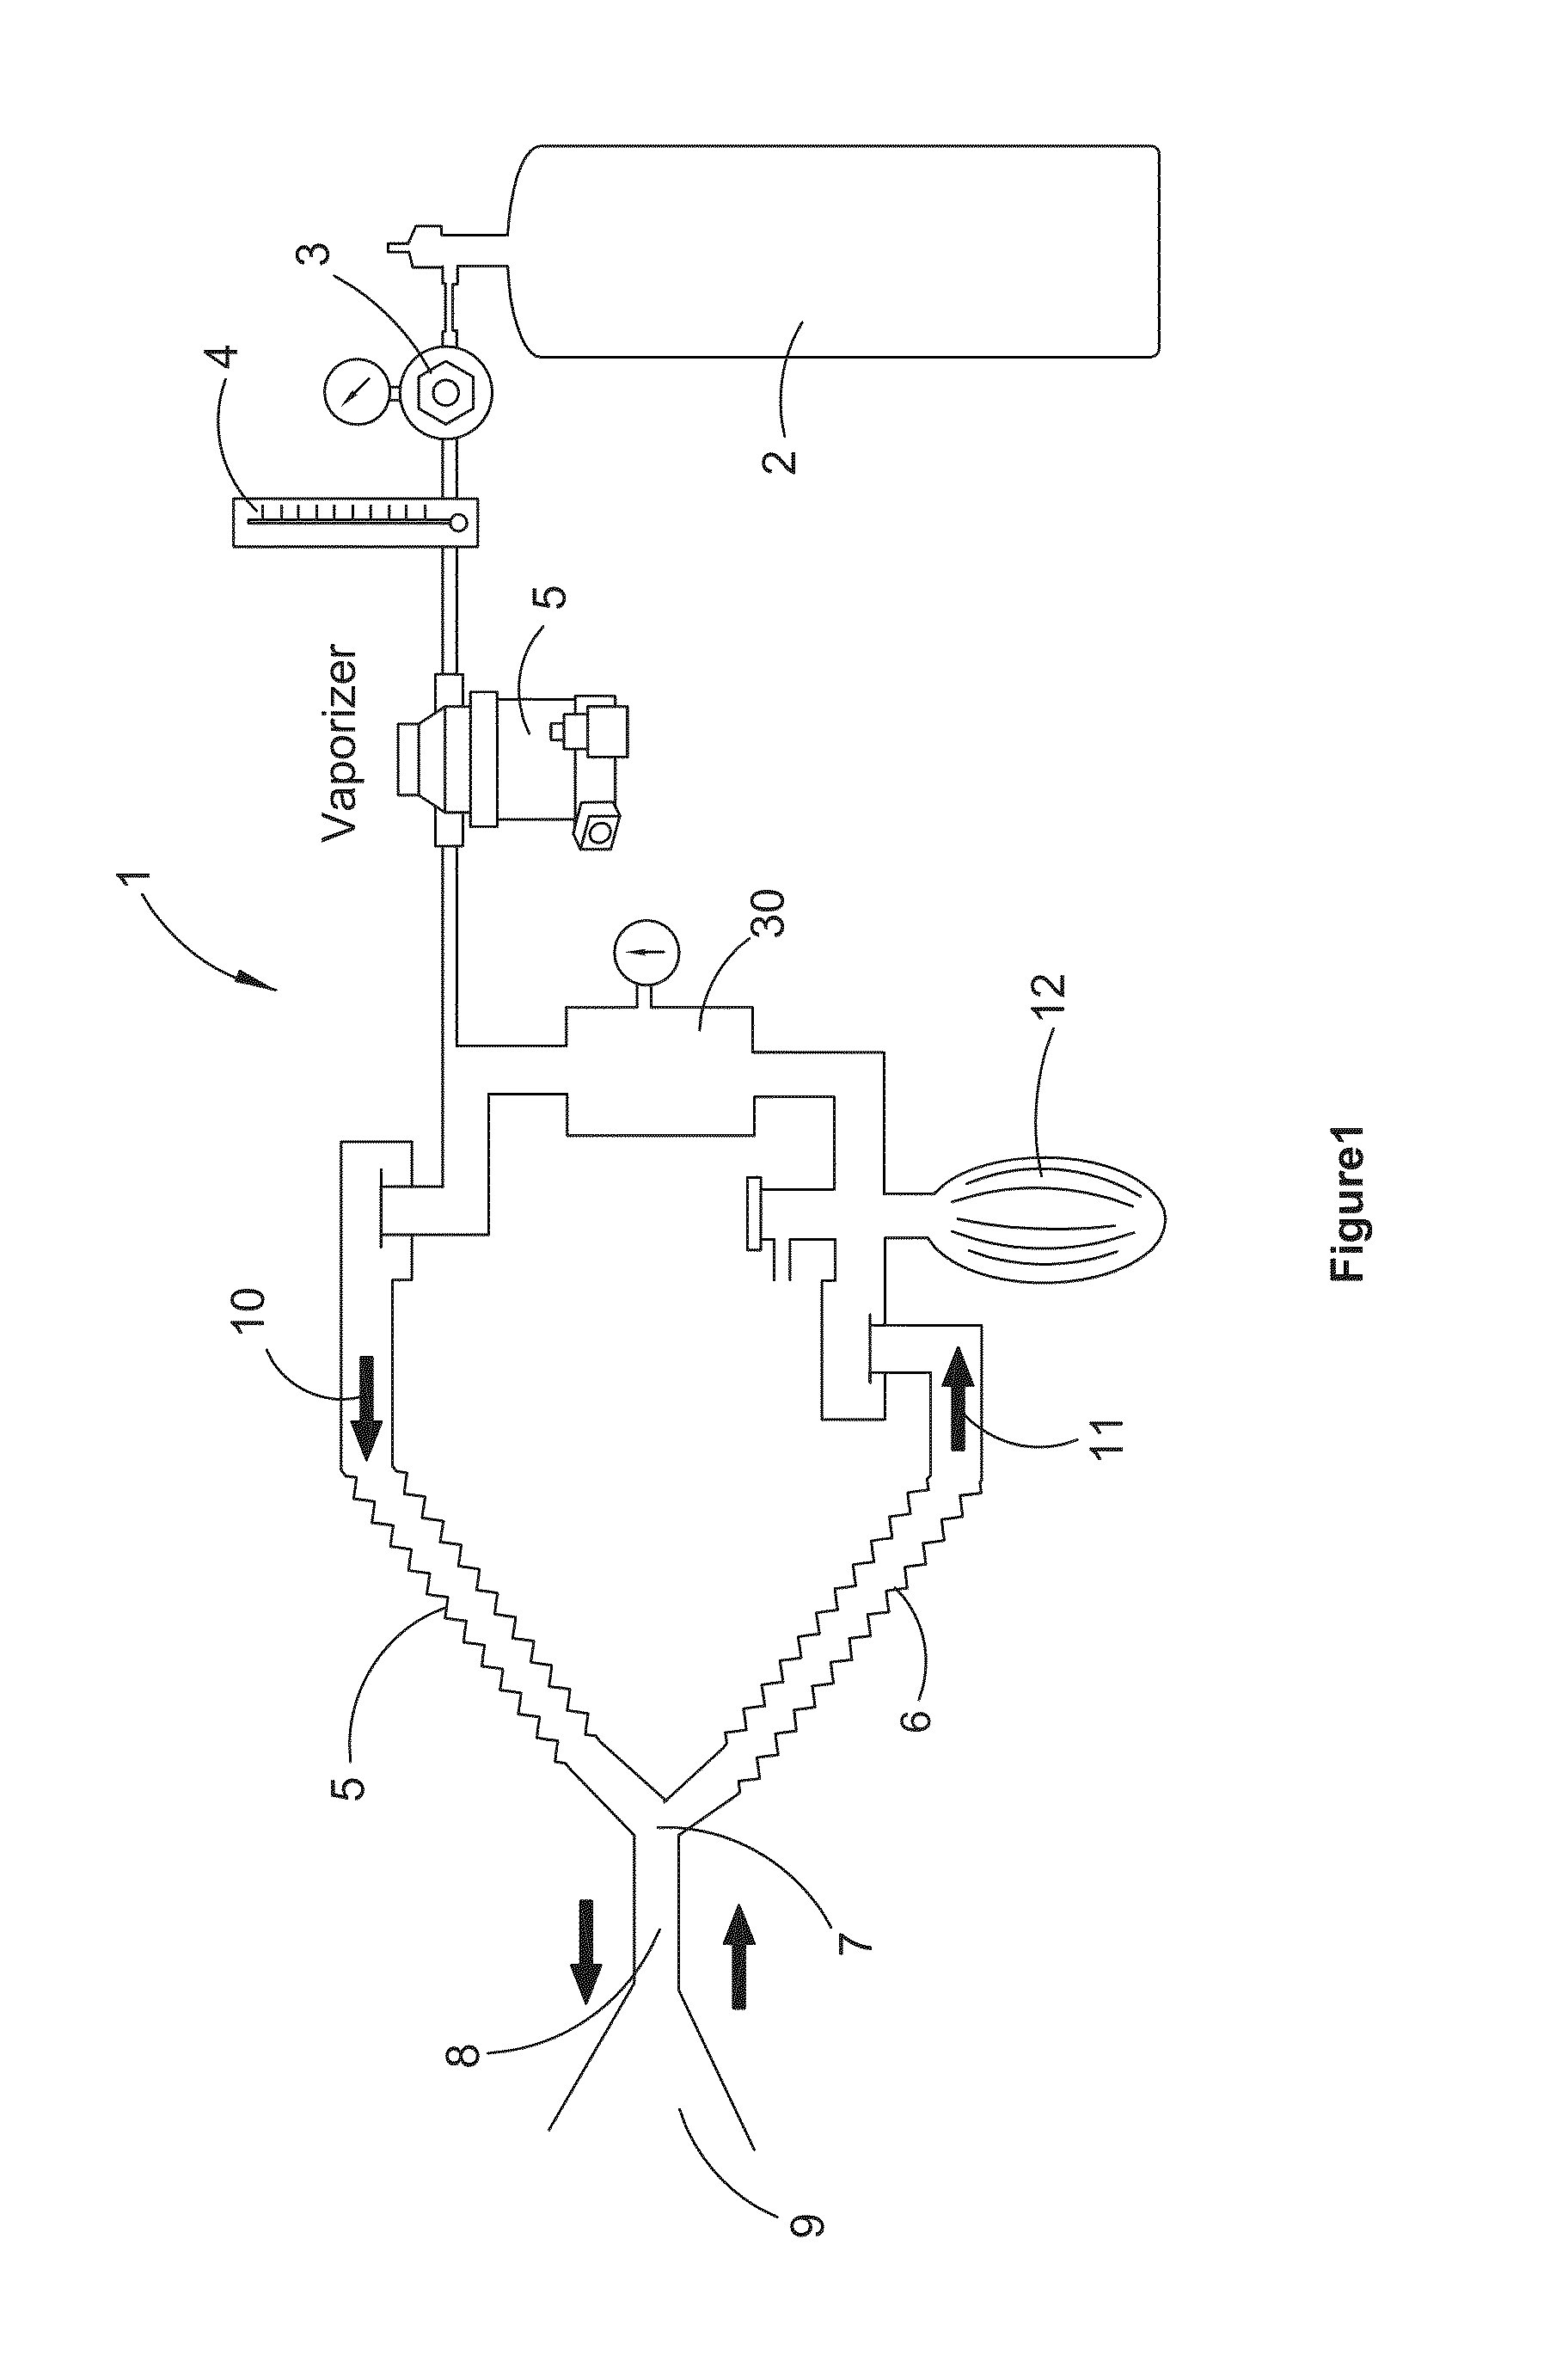 Apparatus and method for maintaining patient temperature during a procedure